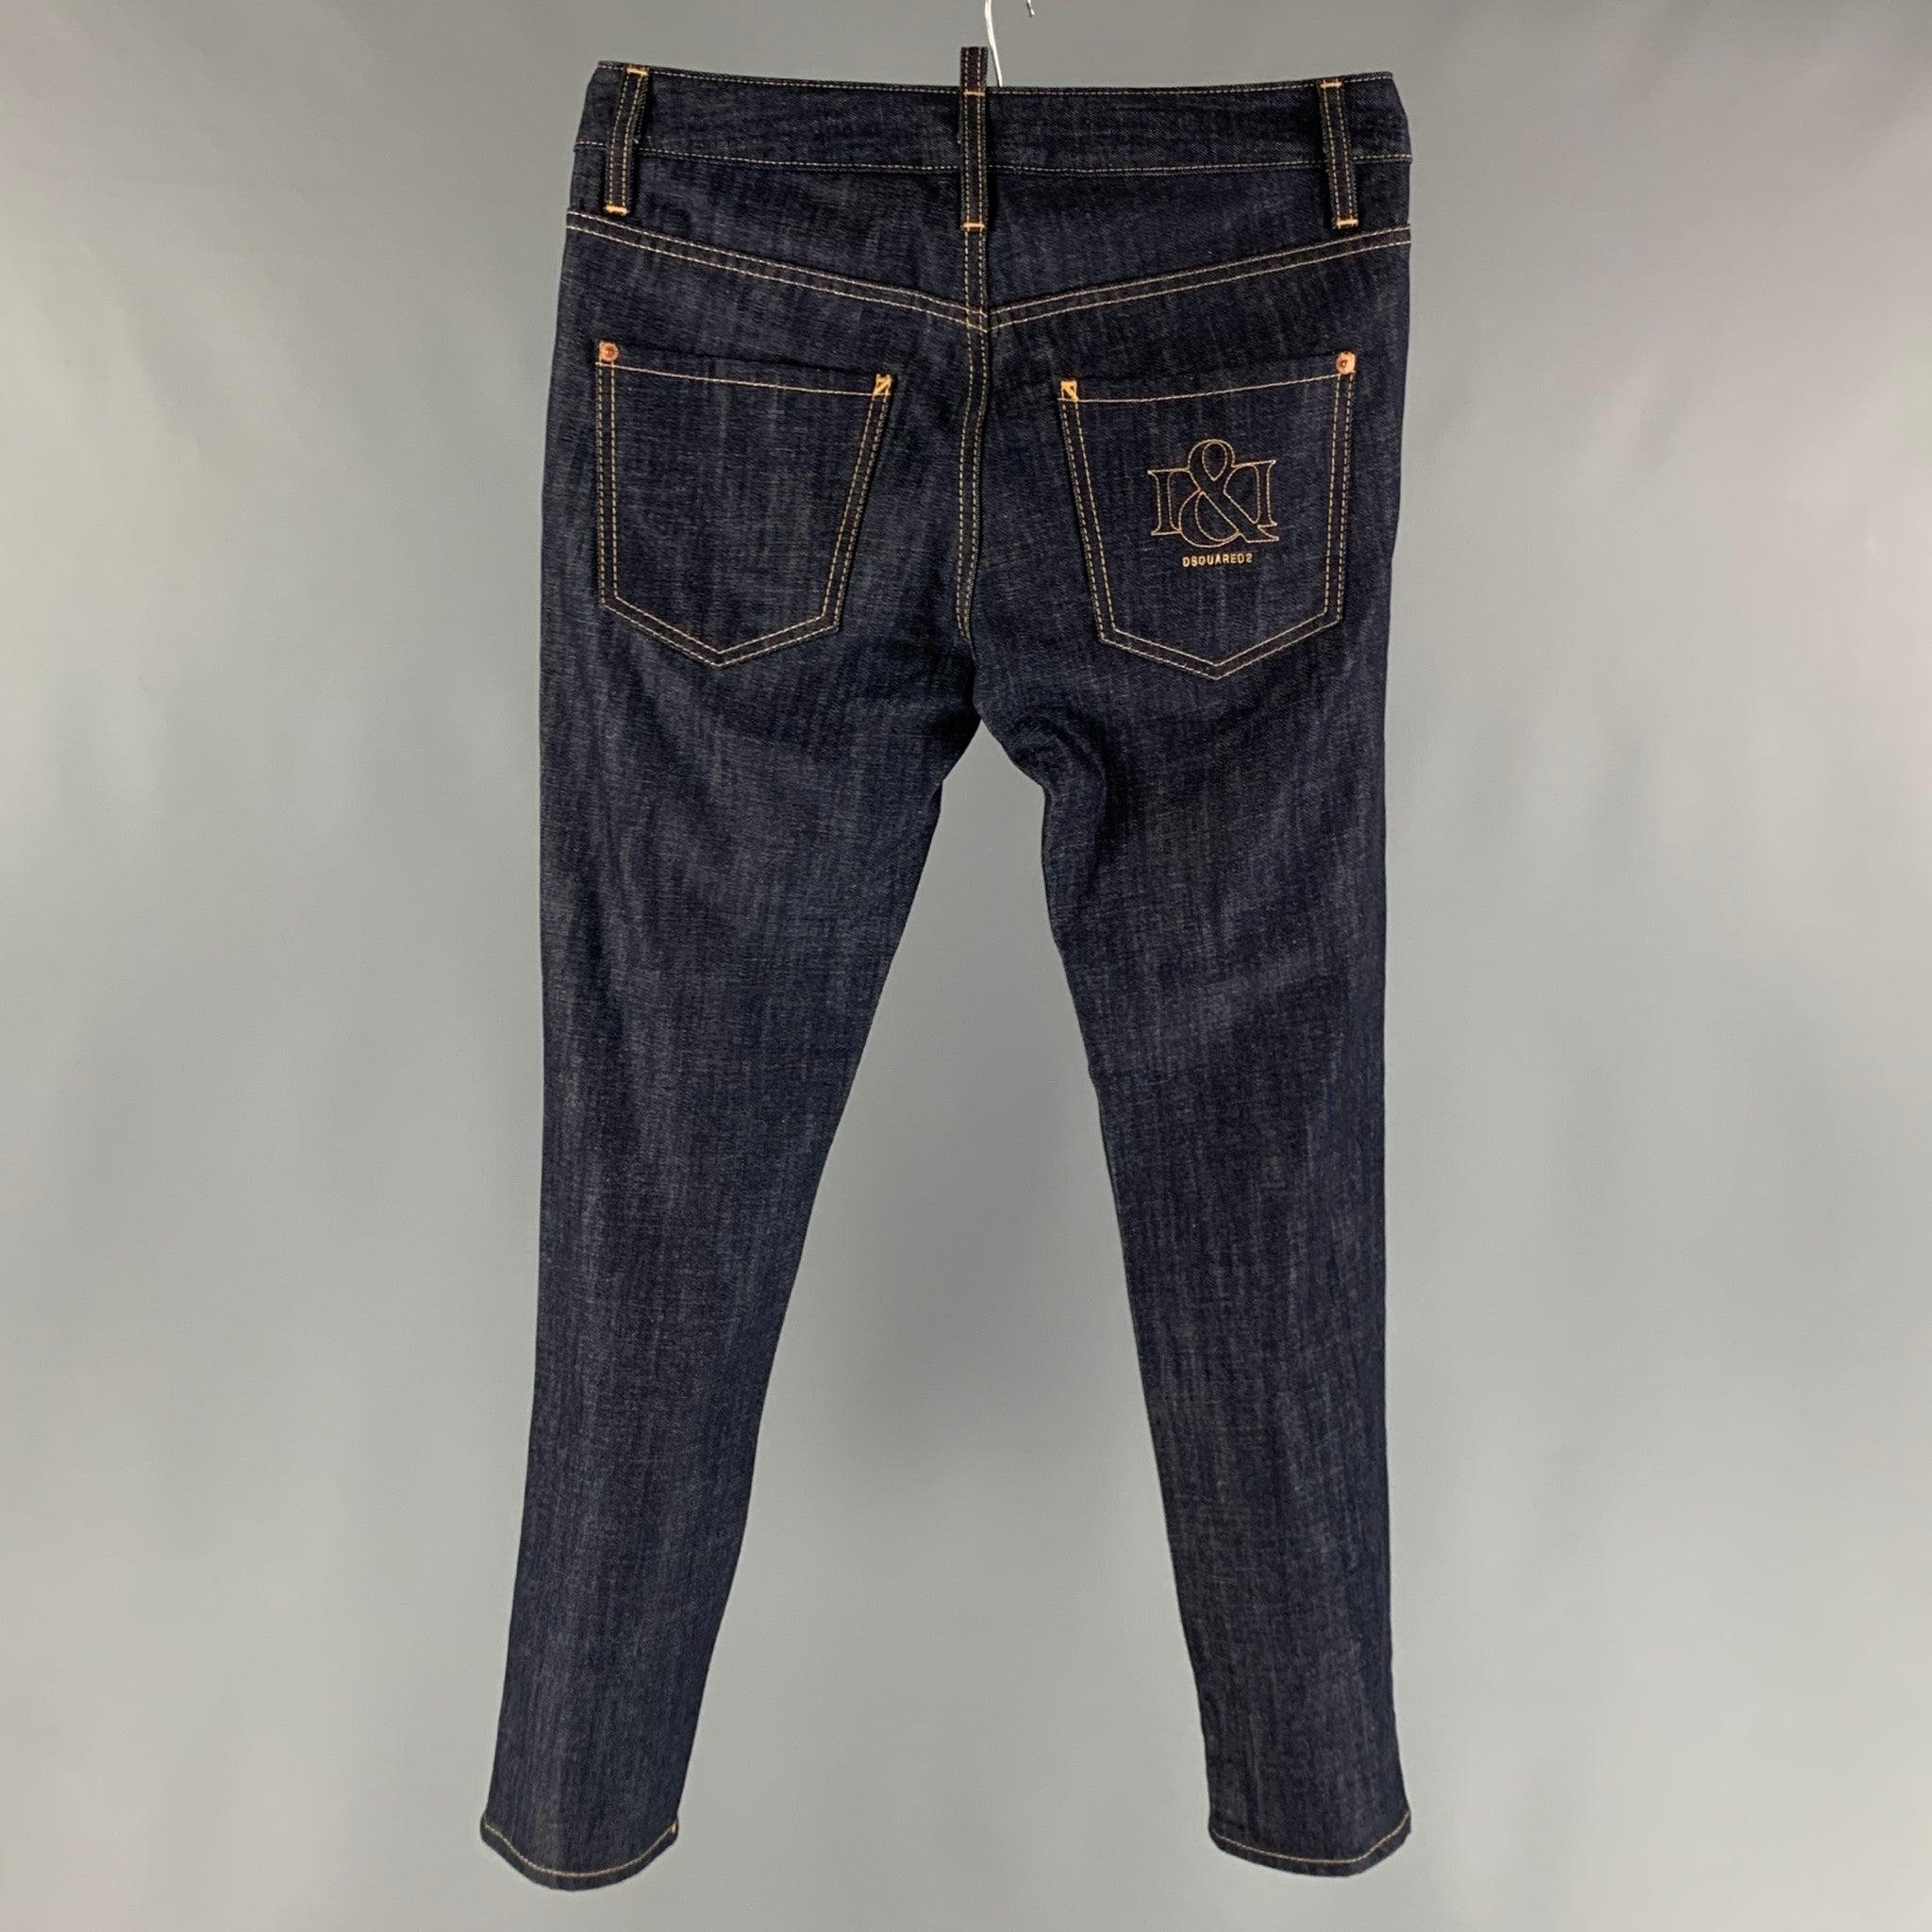 DSQUARED2 jeans pants comes in an indigo selvedge denim featuring a straight leg, contrast stitching, button fly closure. Made in Italy.Excellent Pre-Owned Condition. 

Marked:   40 

Measurements: 
  Waist: 33 inches Rise: 8 inches Inseam: 27.5